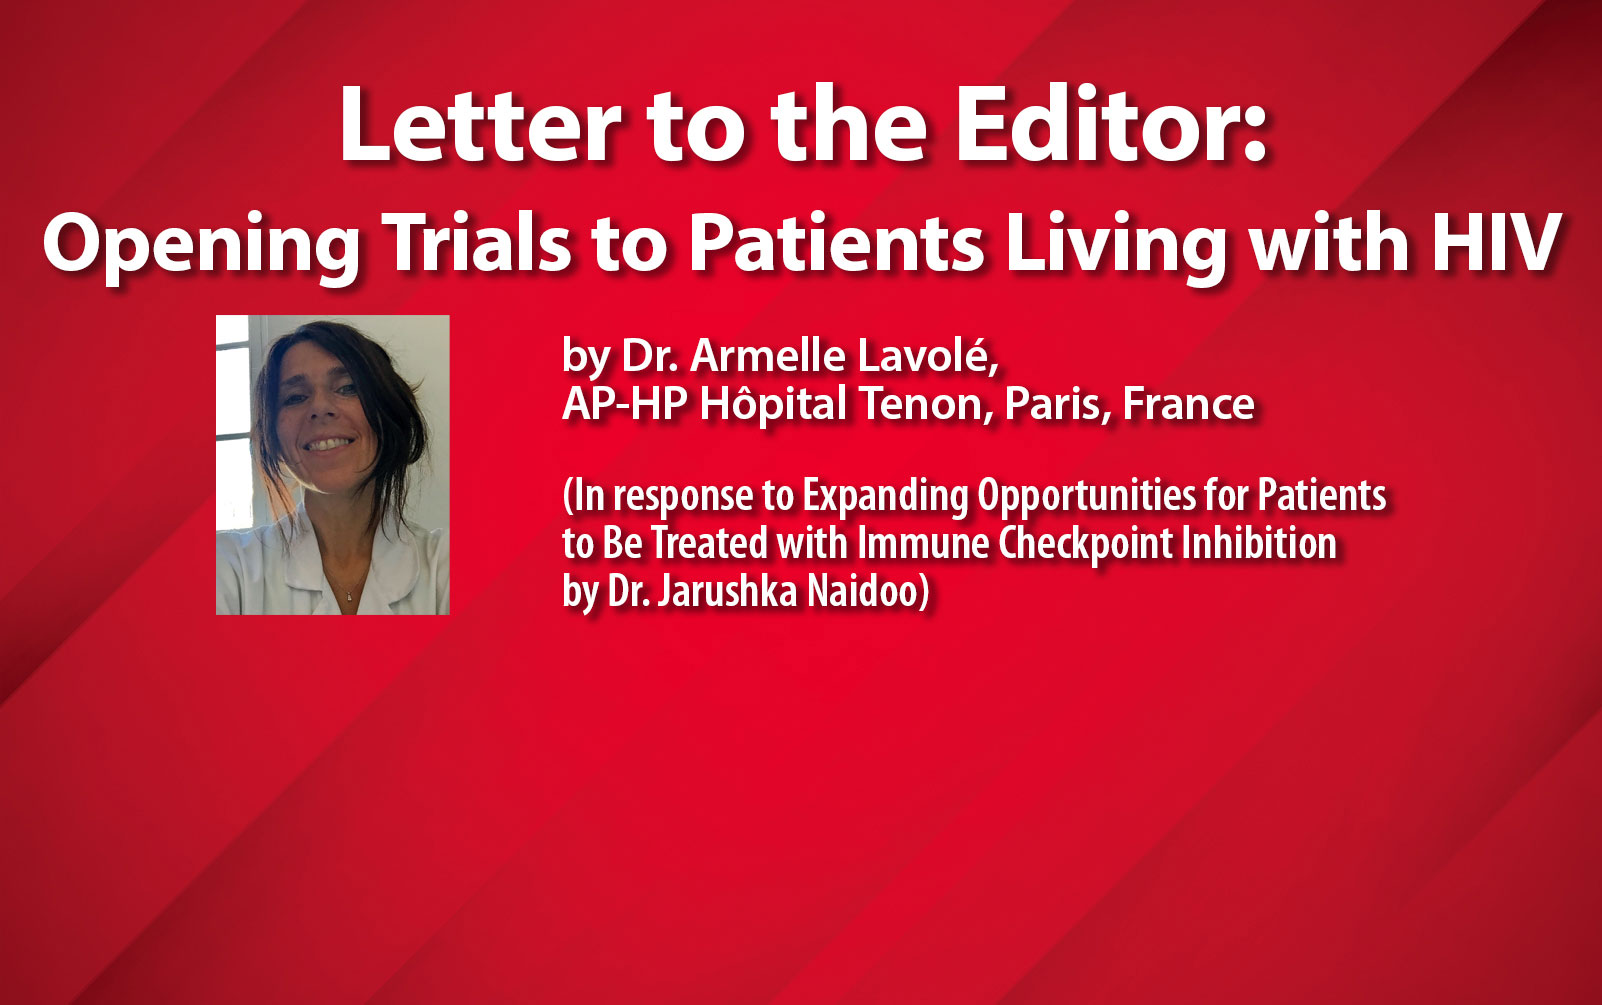 Letter to the Editor: Previously Excluded Patients with Autoimmune Disorders, HIV, and More